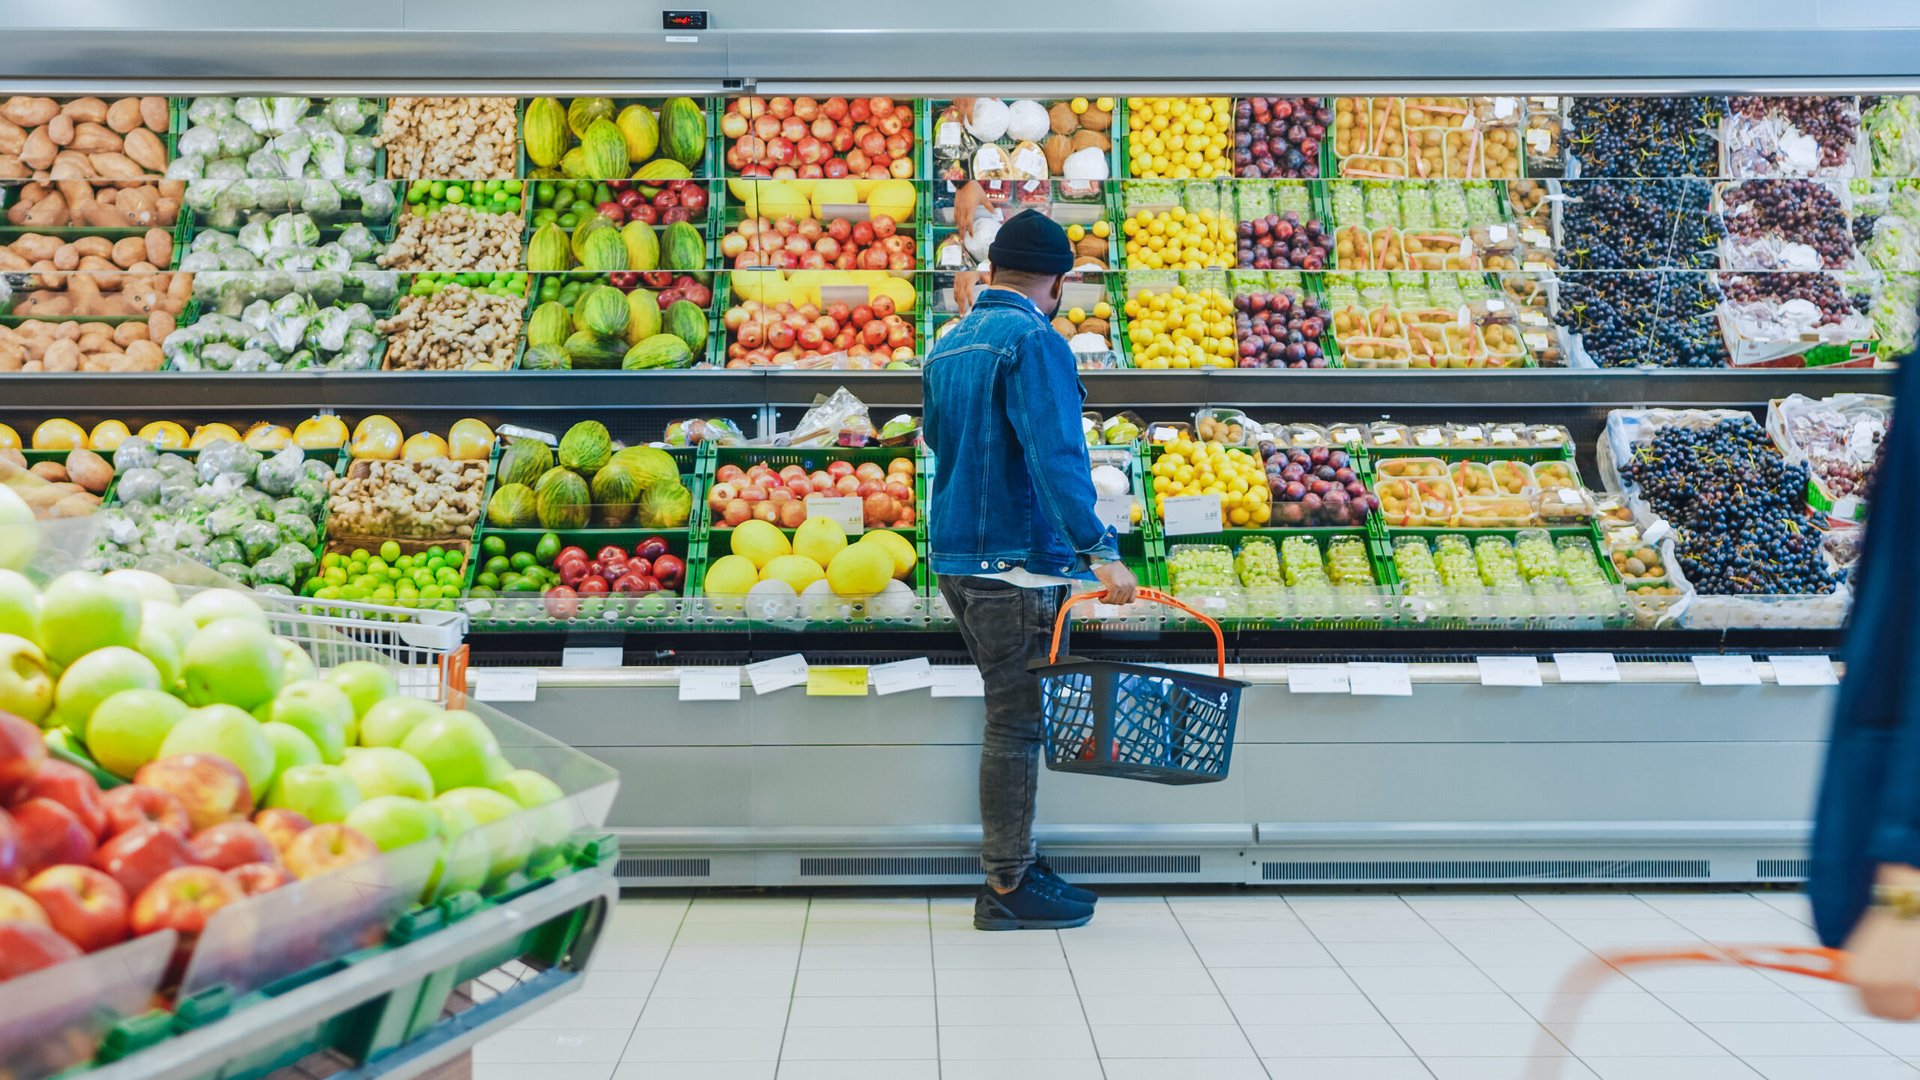 Shopper buying produce at a grocery store